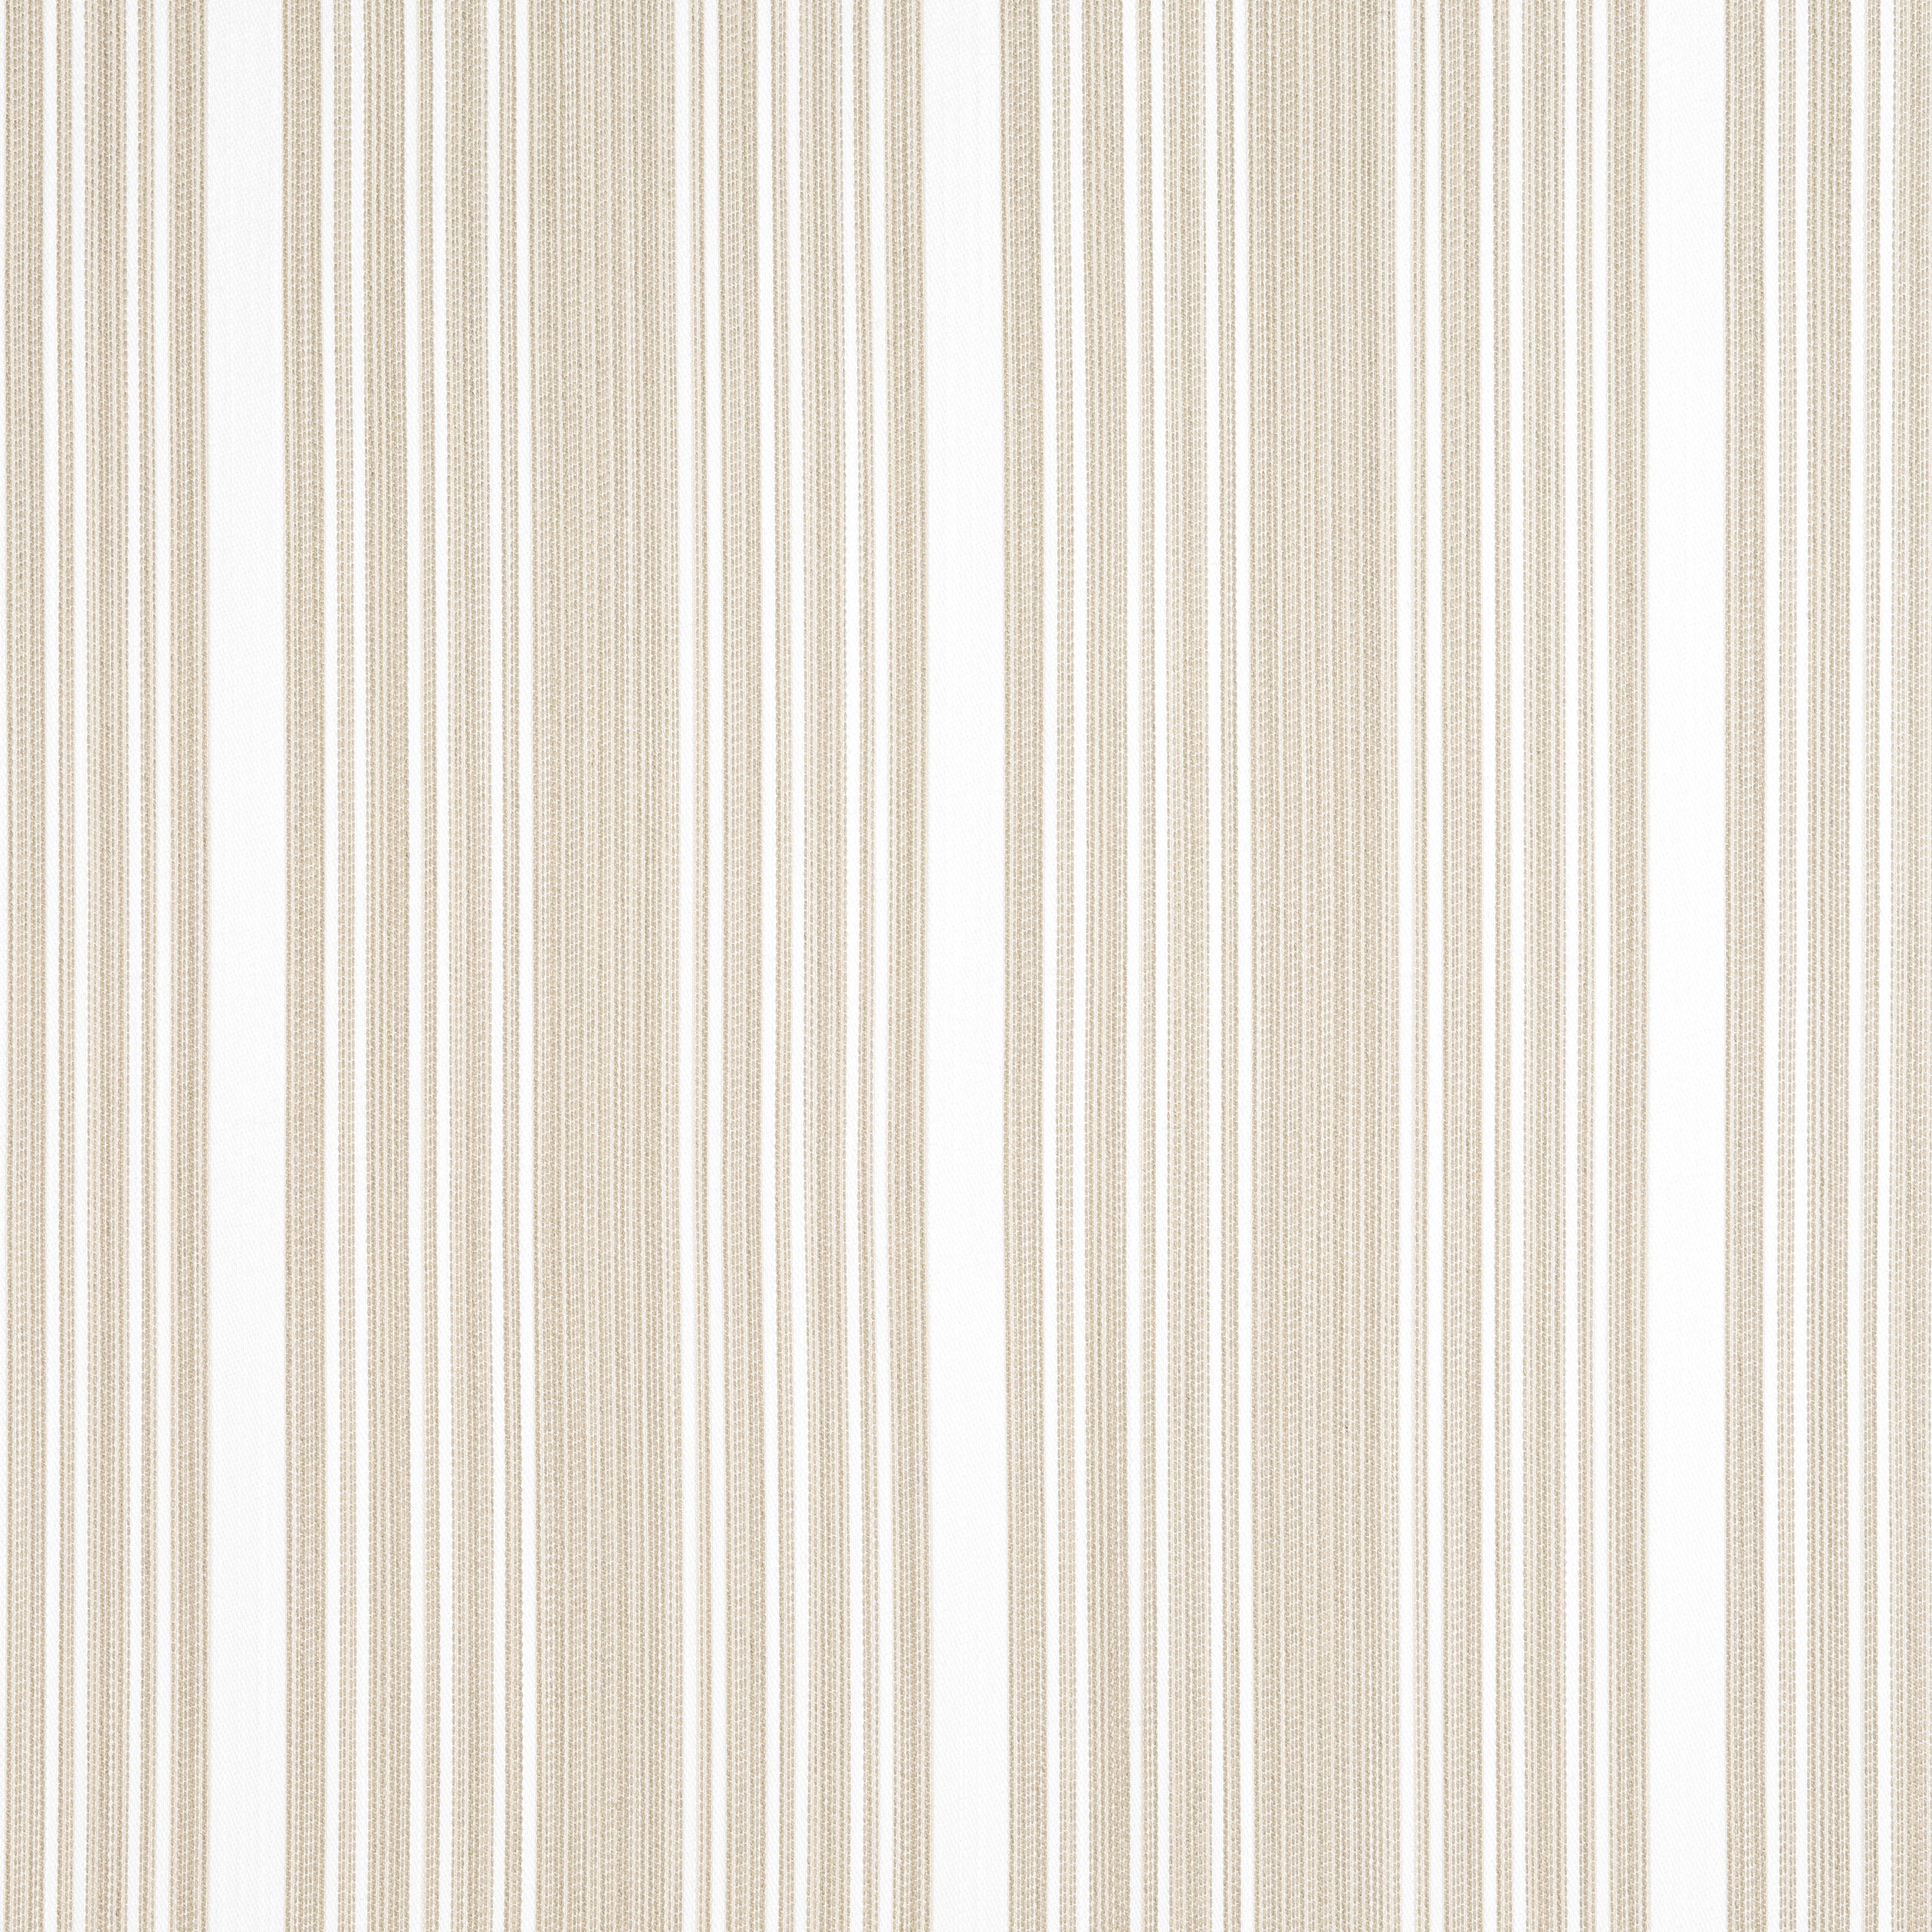 Kaia Stripe fabric in sand color - pattern number W8535 - by Thibaut in the Villa collection